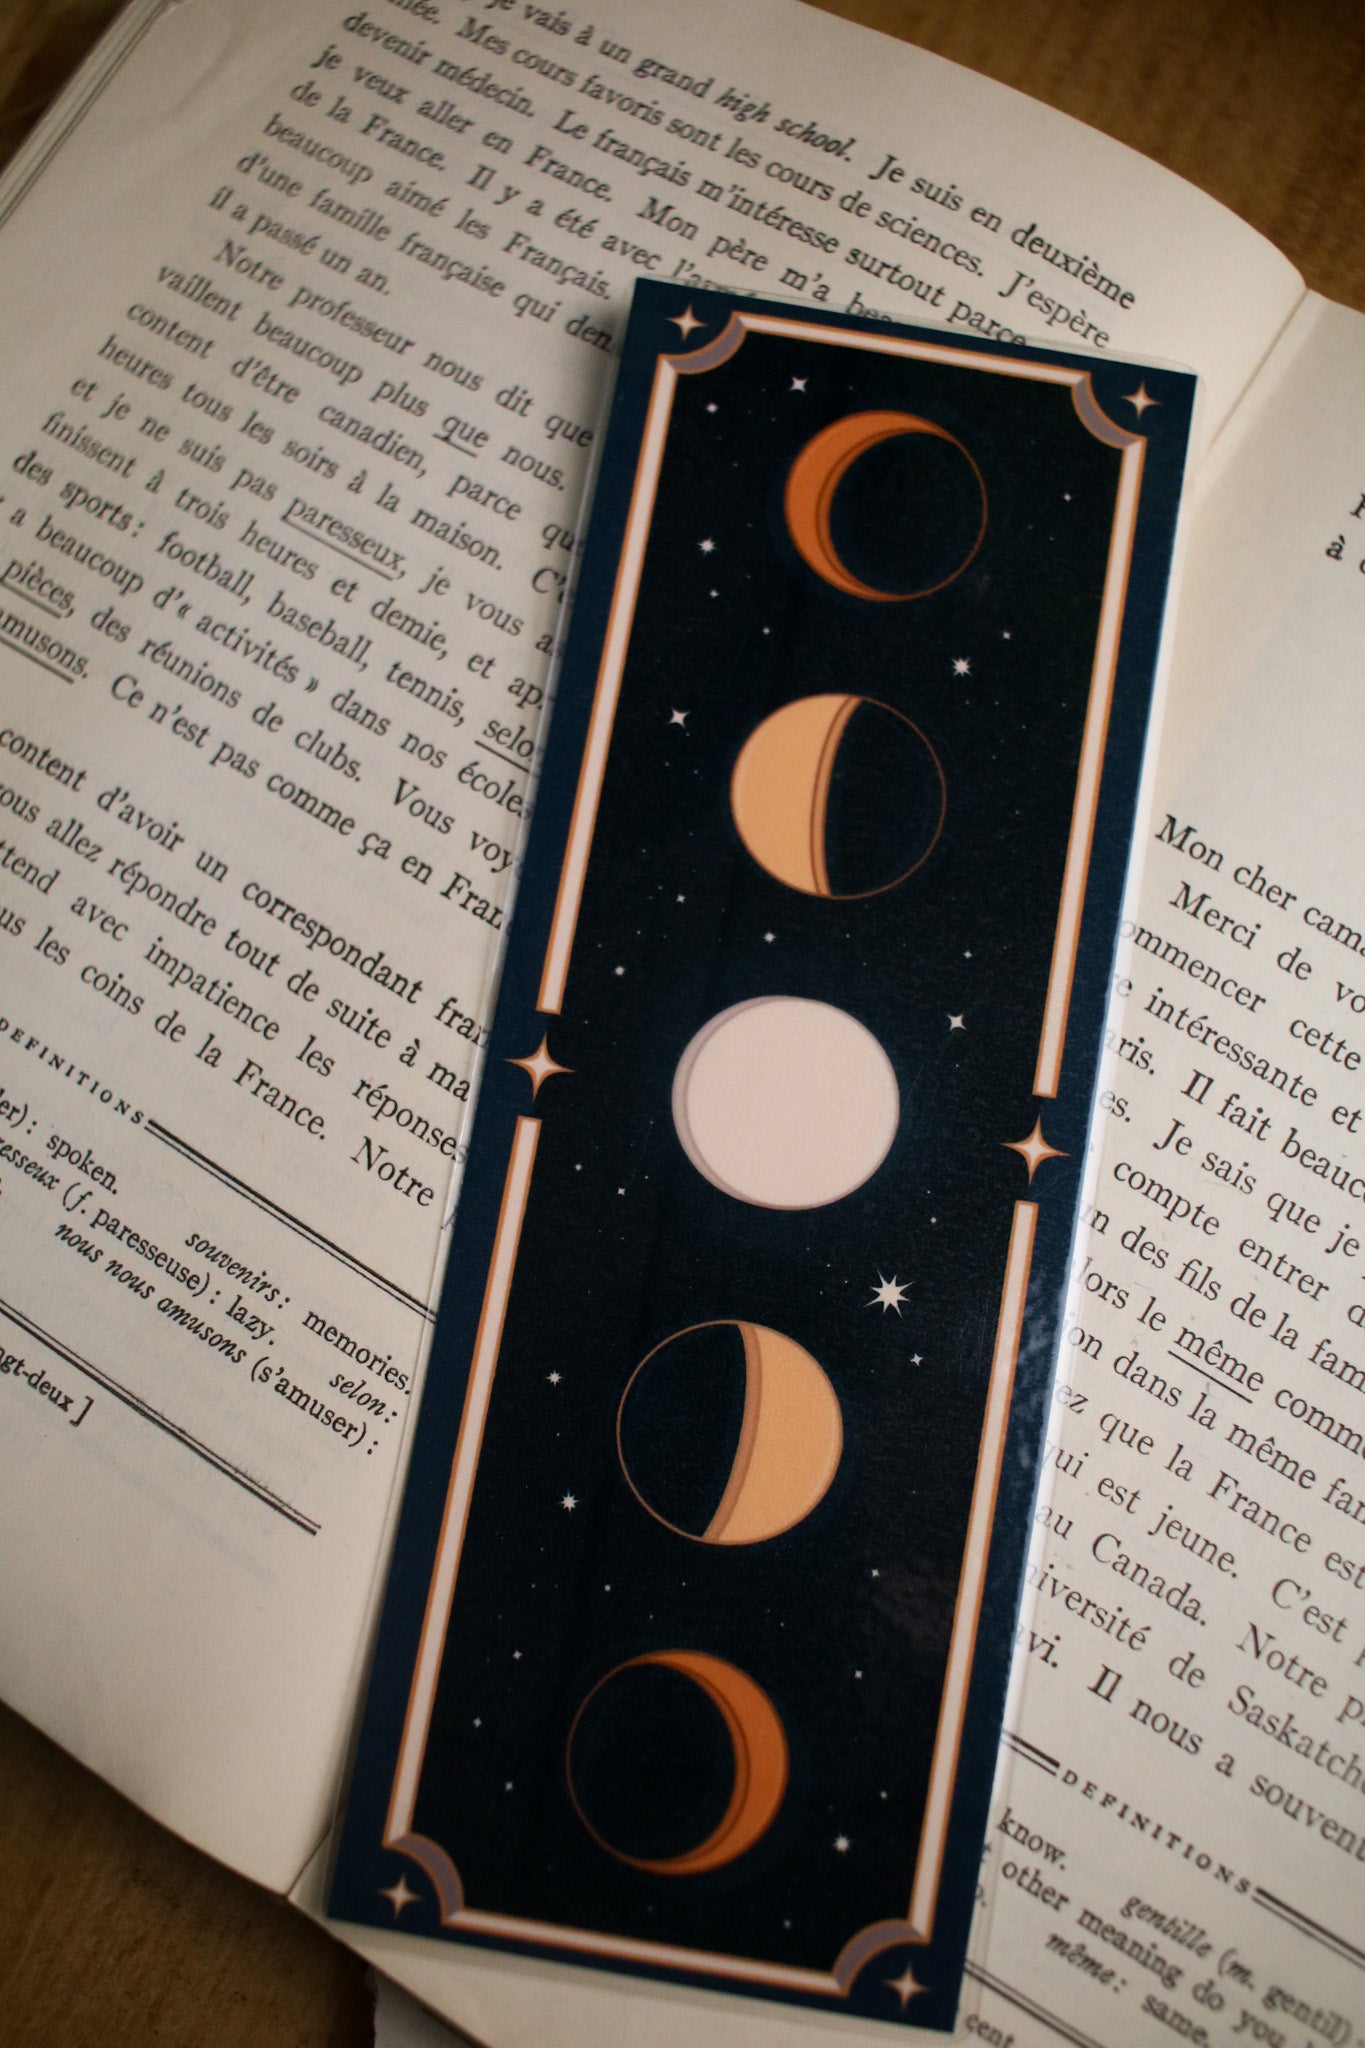 SECONDS - Moon Phase Bookmark